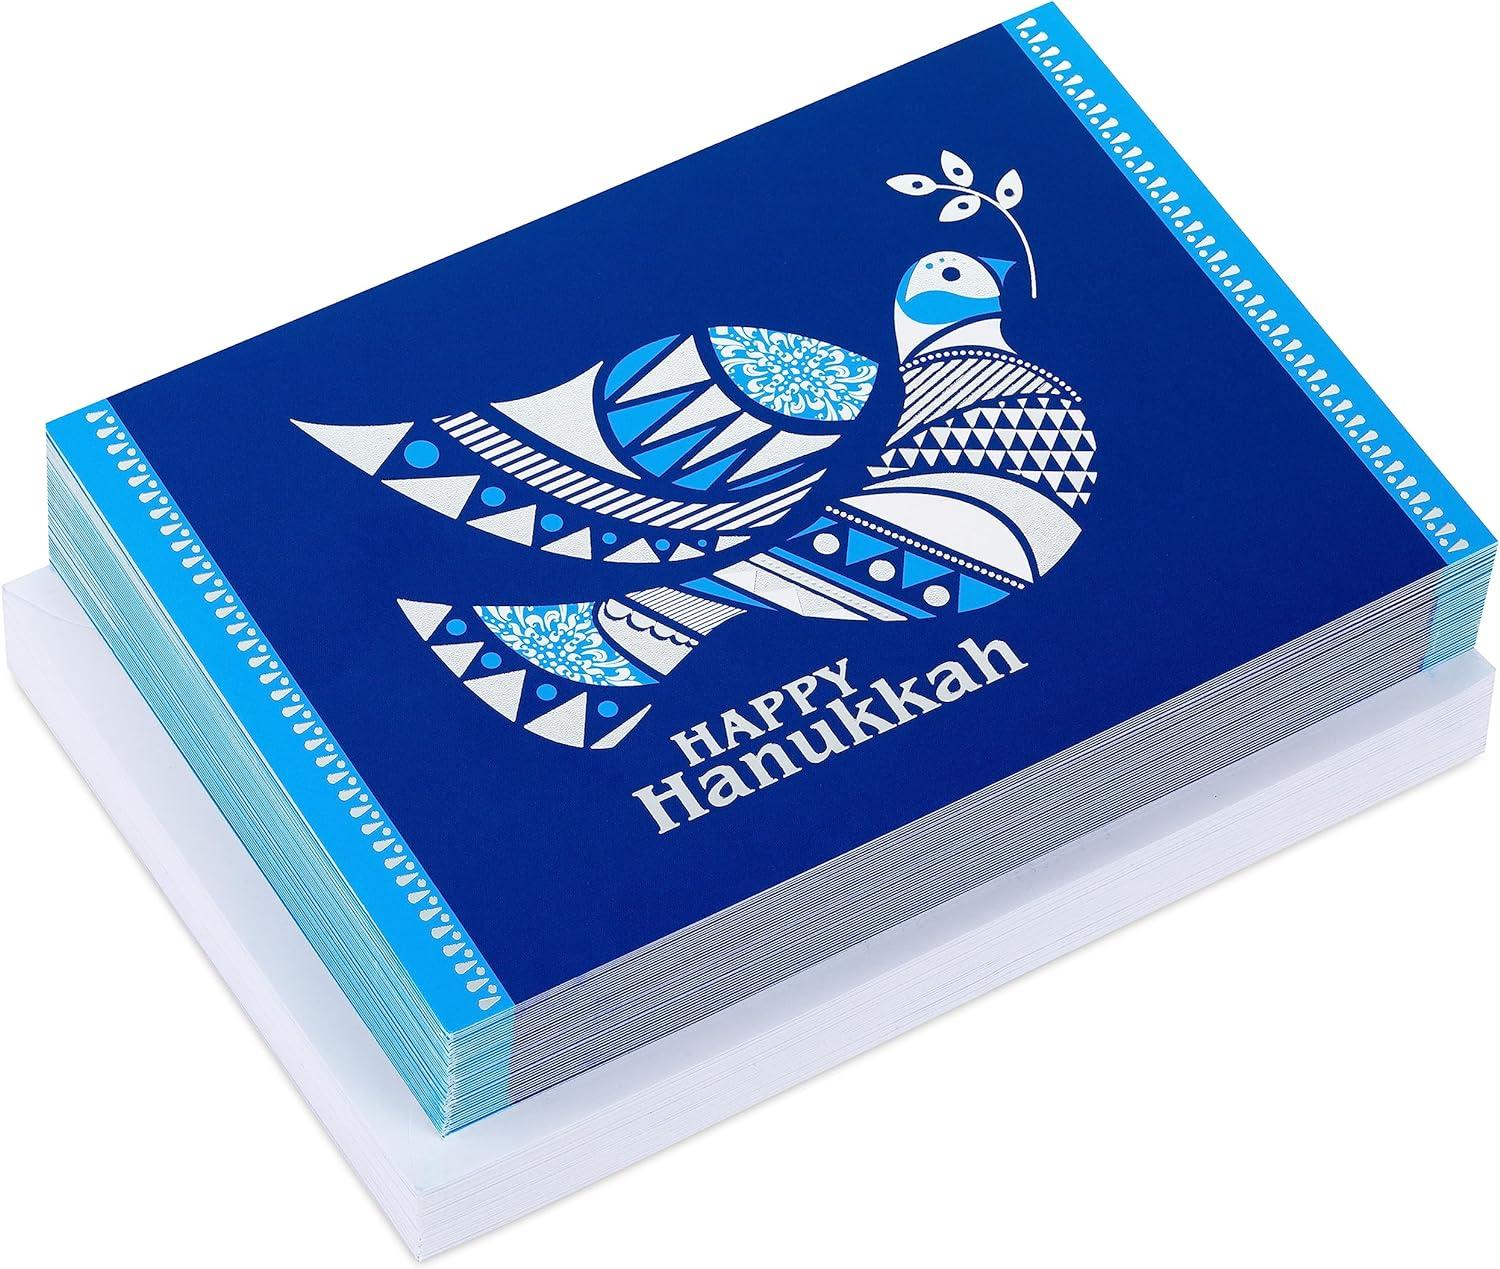 Hallmark Tree of Life Hanukkah Boxed Cards 40 Pack for $5.45